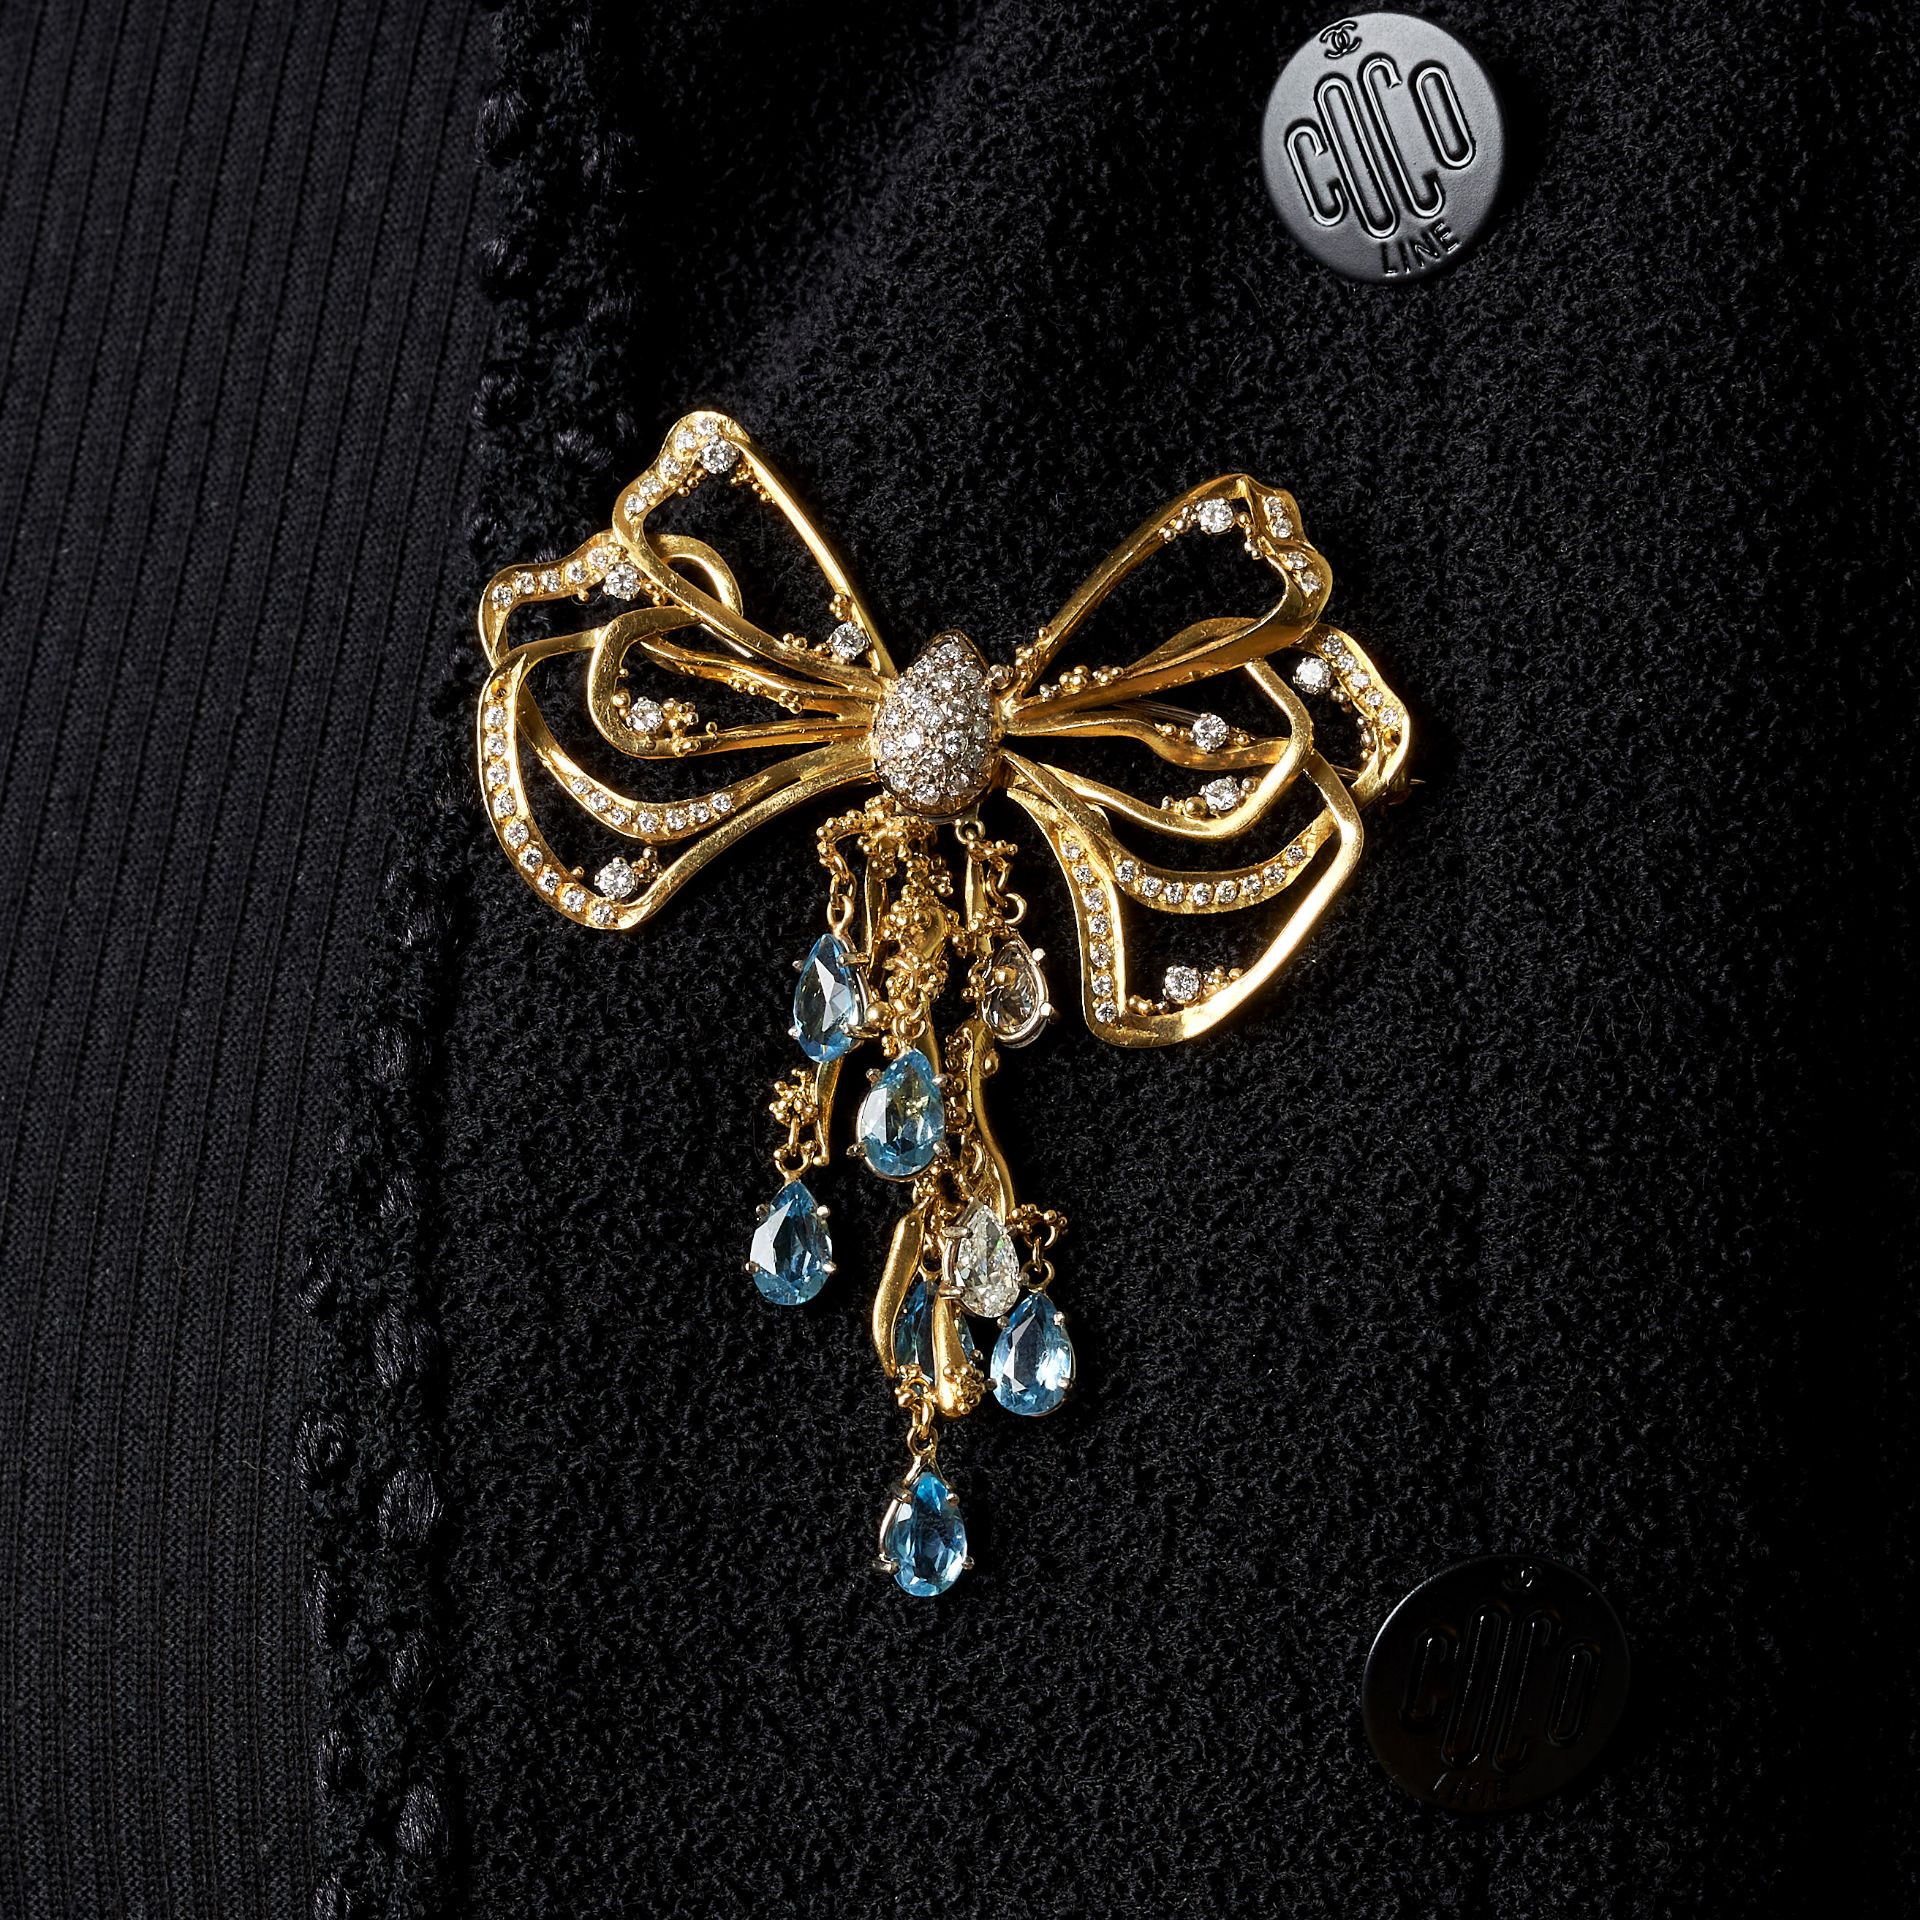 CHARLES DE TEMPLE, A VINTAGE AQUAMARINE AND DIAMOND BOW BROOCH in 18ct yellow gold, designed as a... - Image 2 of 2